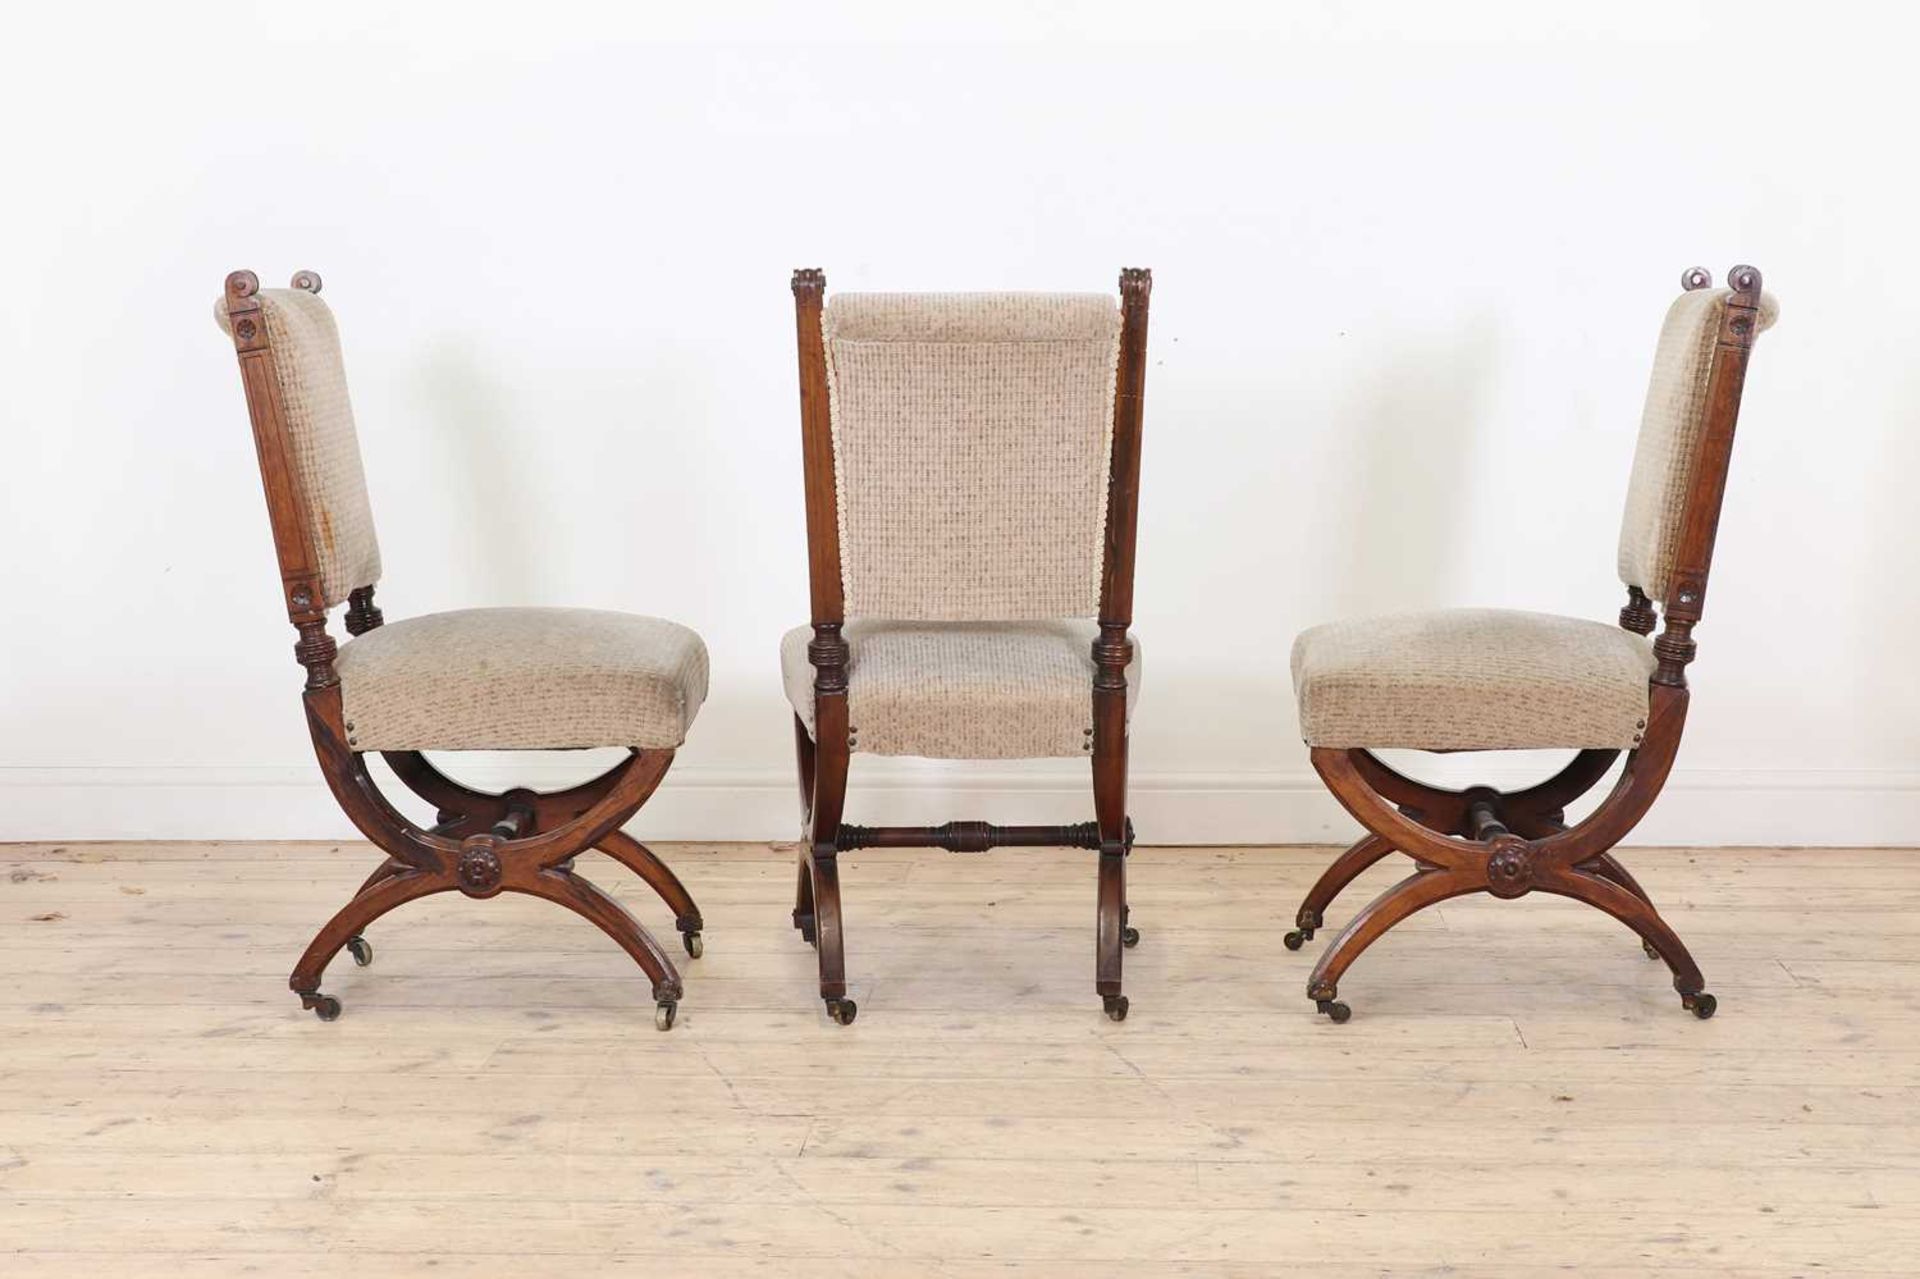 A set of four Aesthetic rosewood chairs, - Image 4 of 4